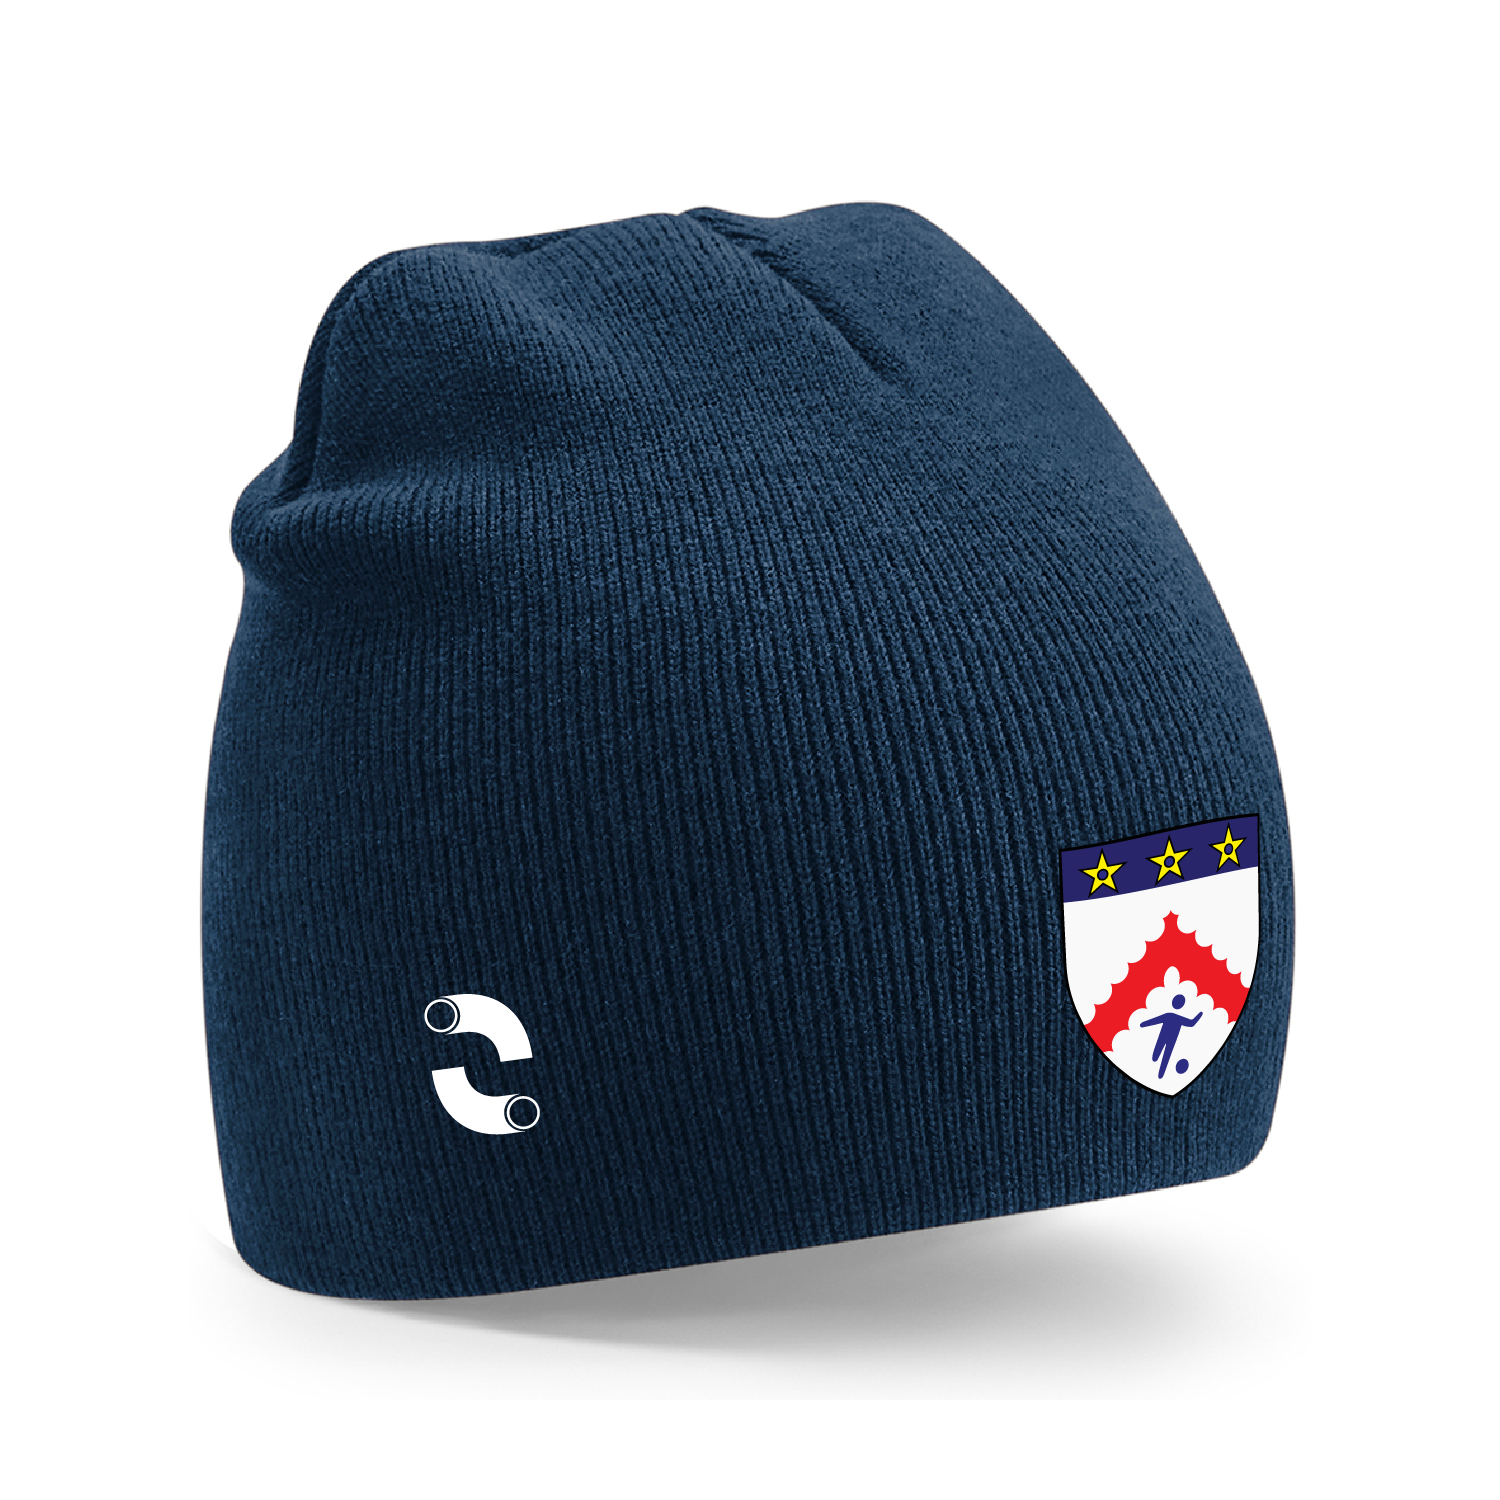 Keble College Oxford Football Team Sports Recycled Pull On Snug Fit Beanie - French Navy